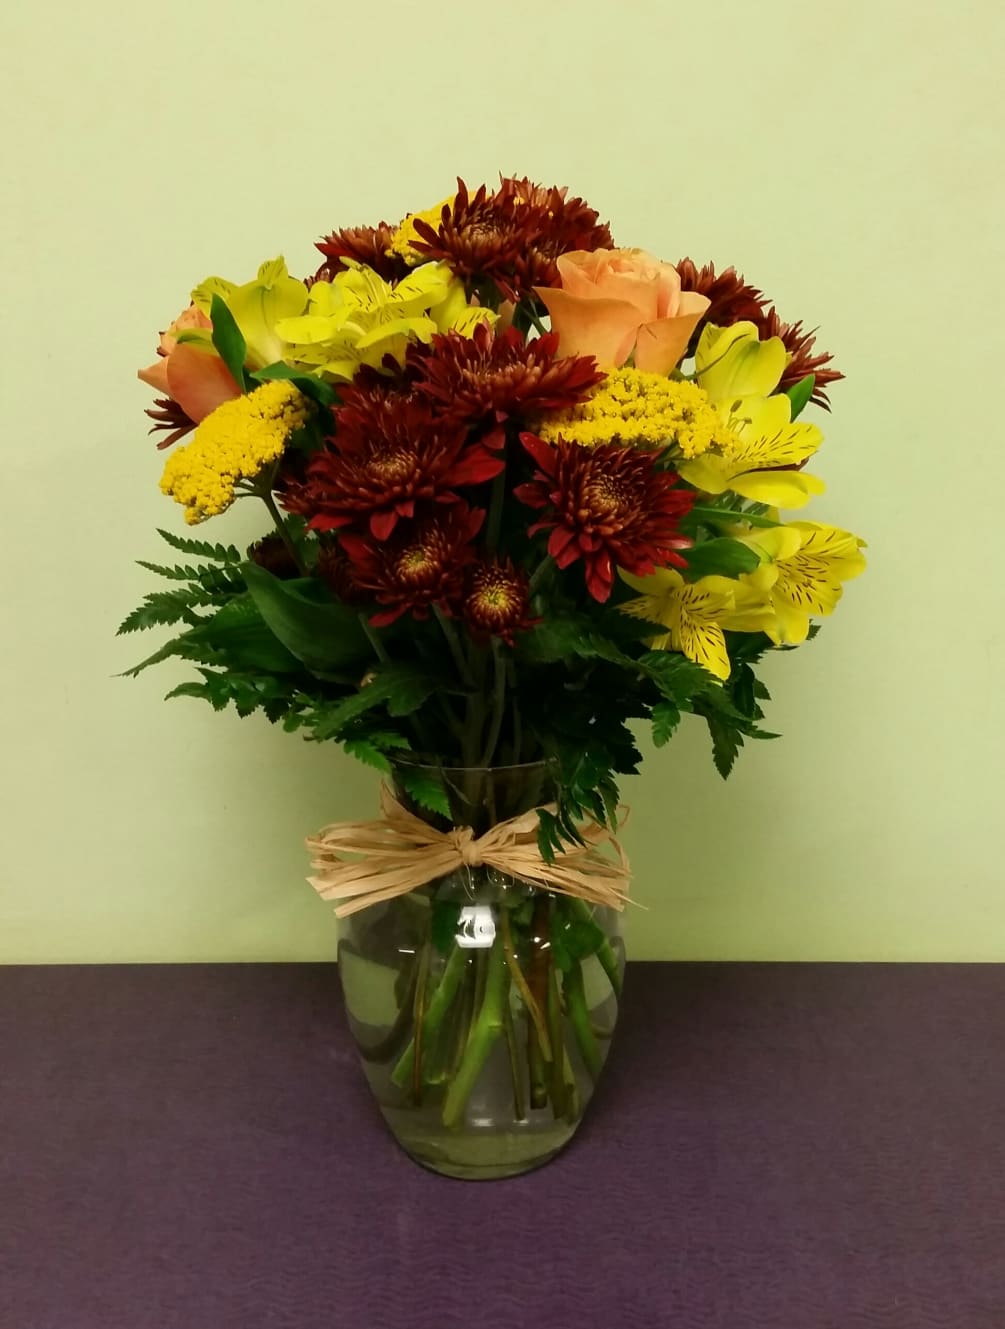 This simple arrangement of fall colors and long lasting flowers will get